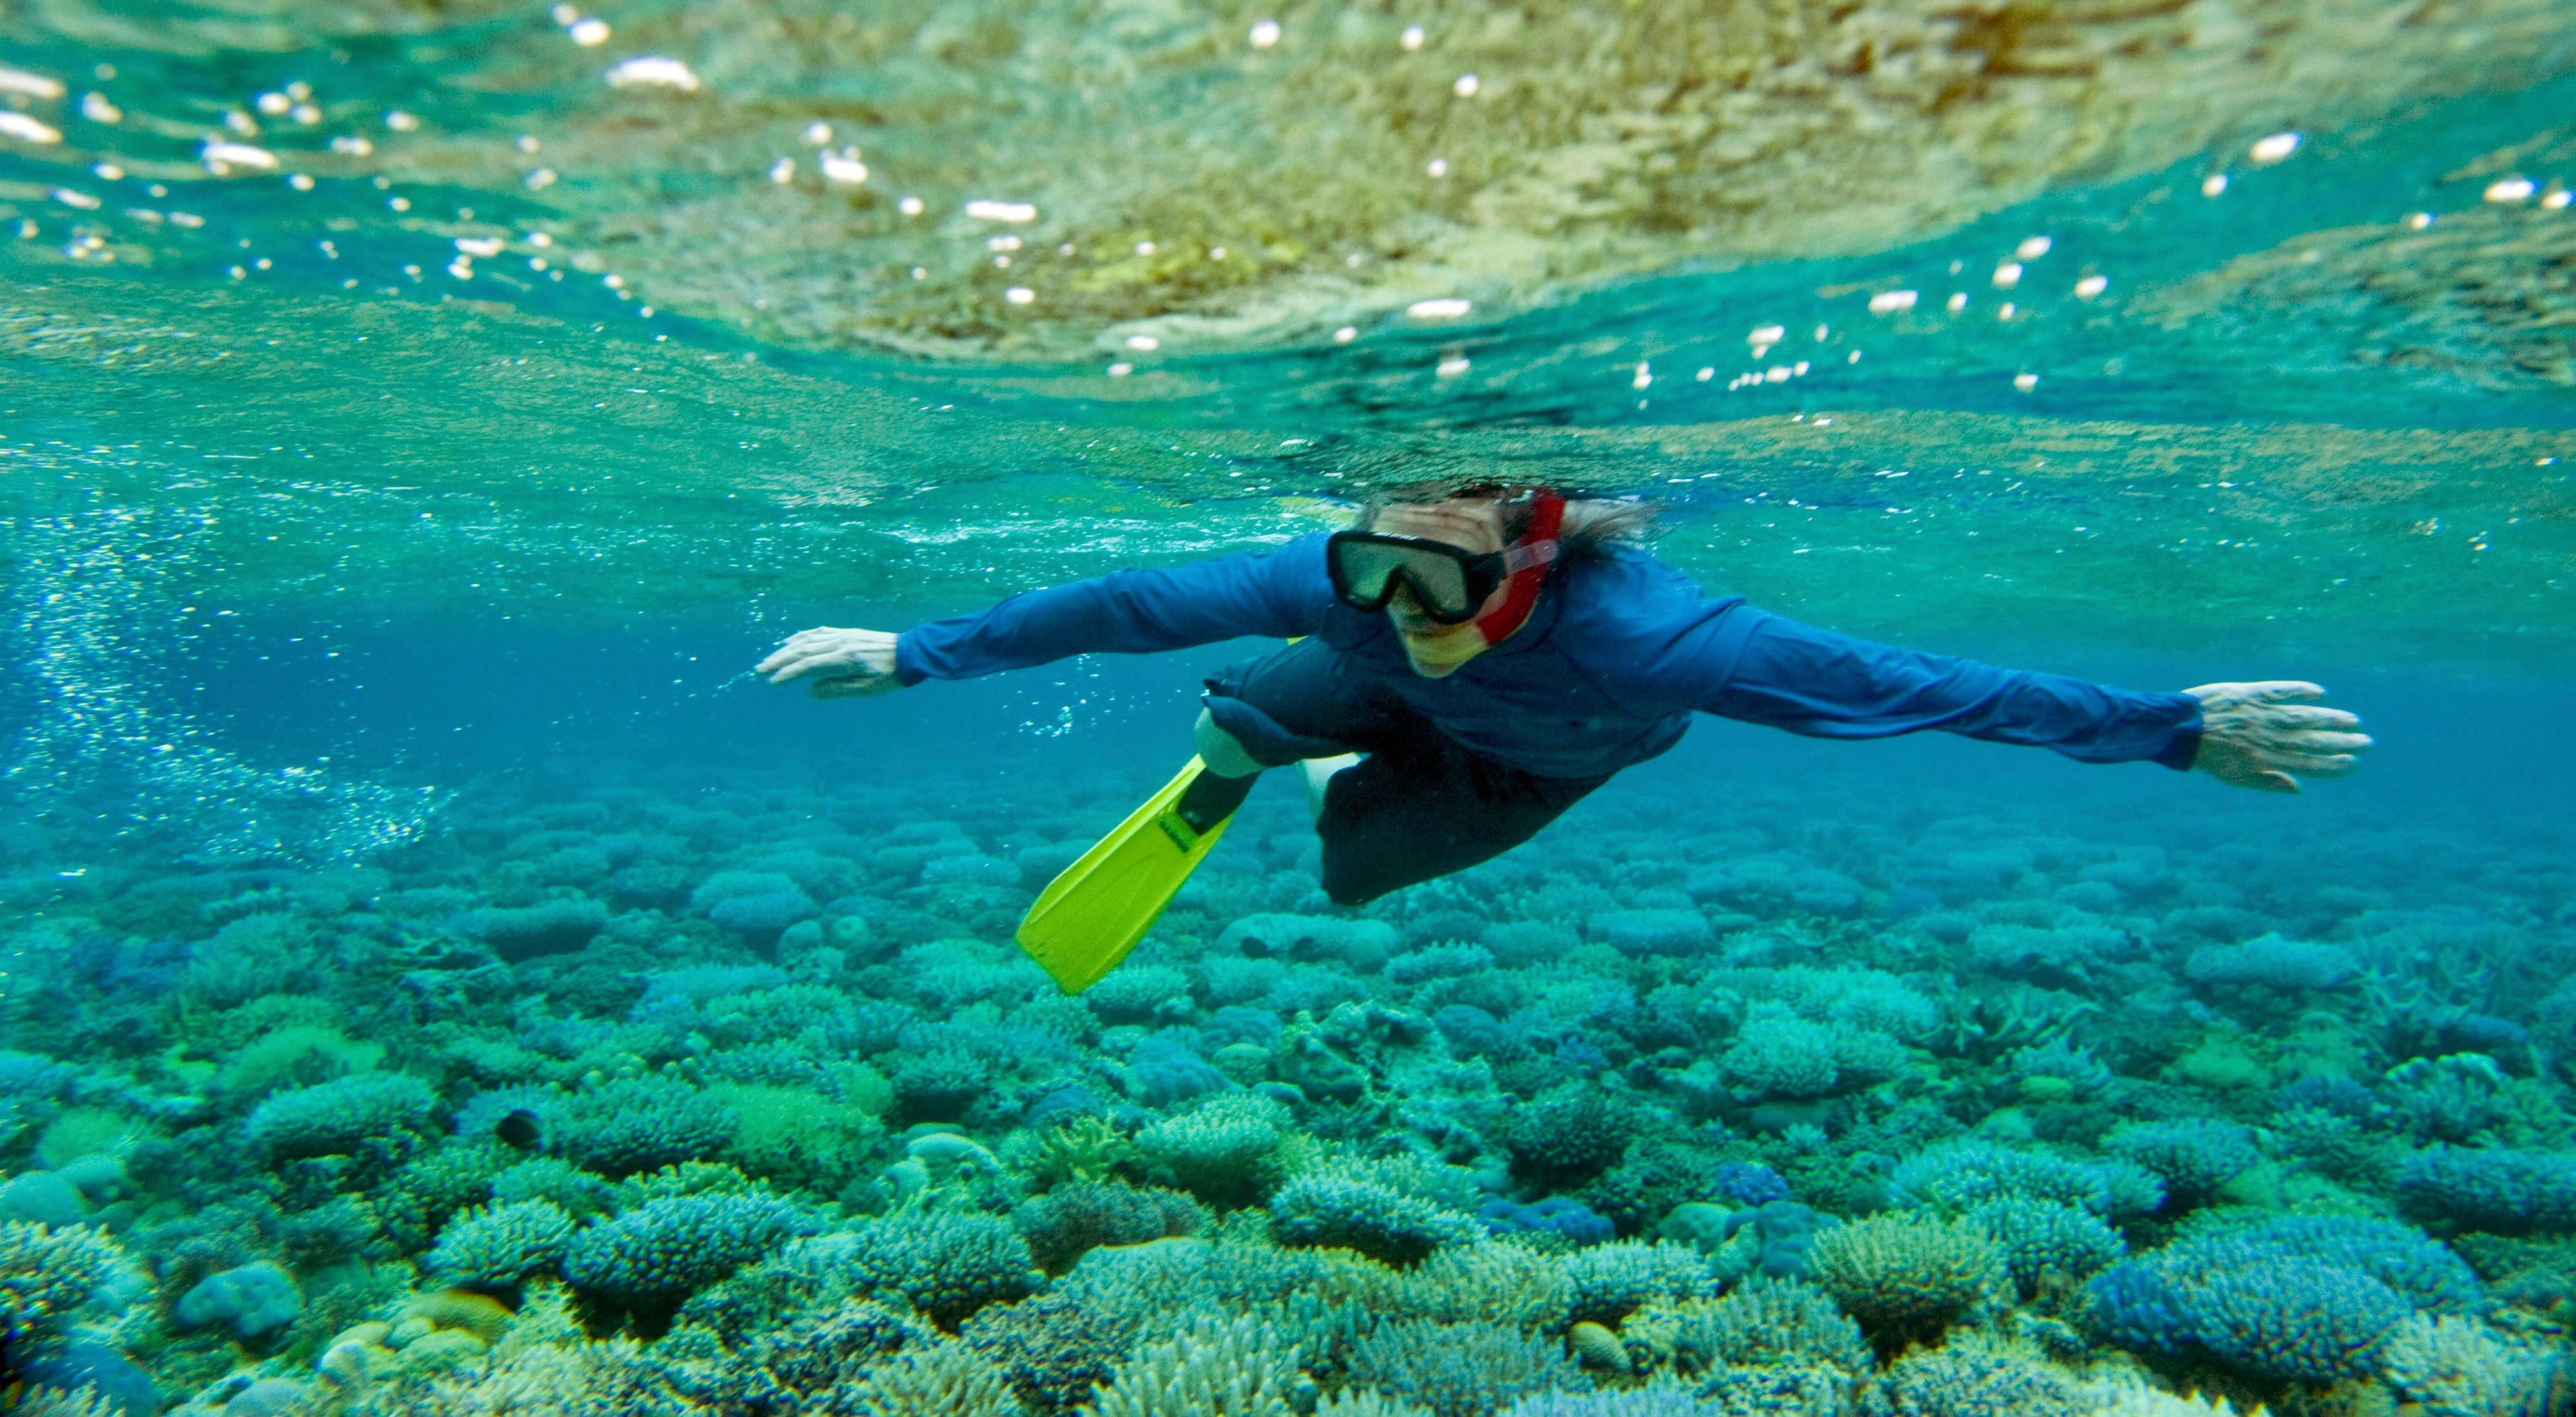 A snorkeler explores a coral reef in the coastal waters of Micronesia.